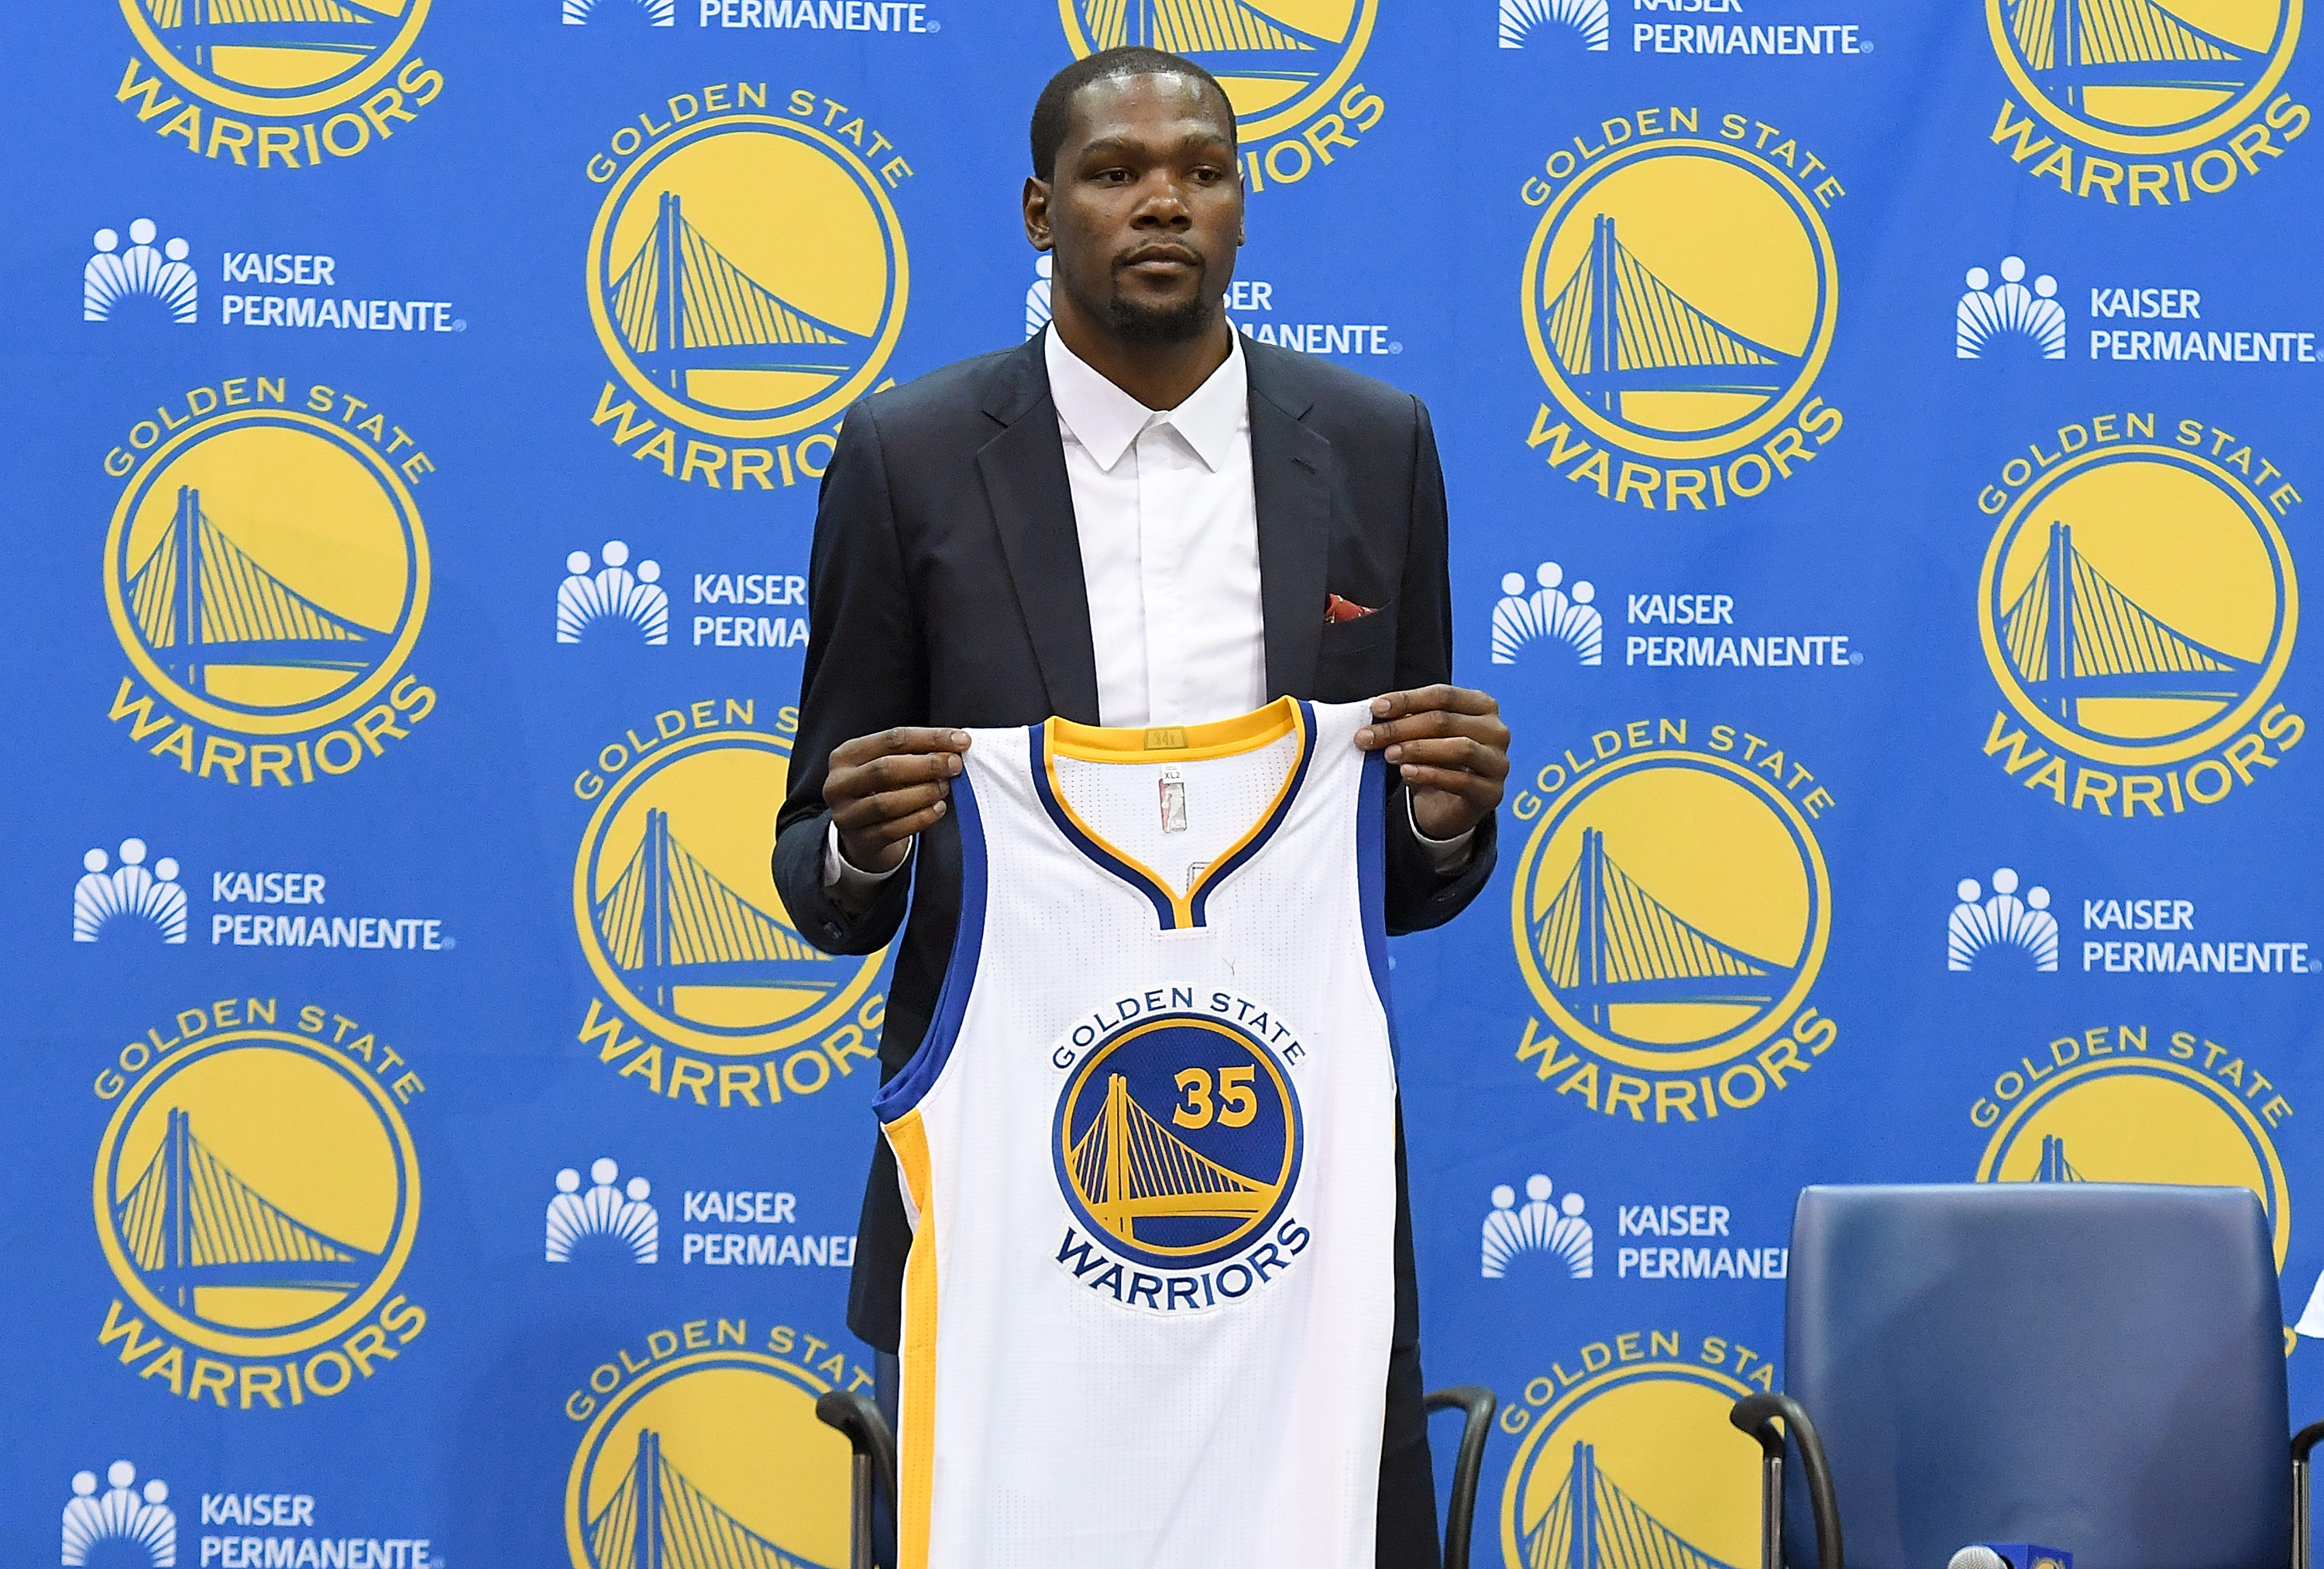 OAKLAND, CA - JULY 07: Kevin Durant #35 of the Golden State Warriors poses with his new jersey during the press conference where he was introduced as a member of the Golden State Warriors after they signed him as a free agent on July 7, 2016 in Oakland, California.   Thearon W. Henderson/Getty Images/AFP